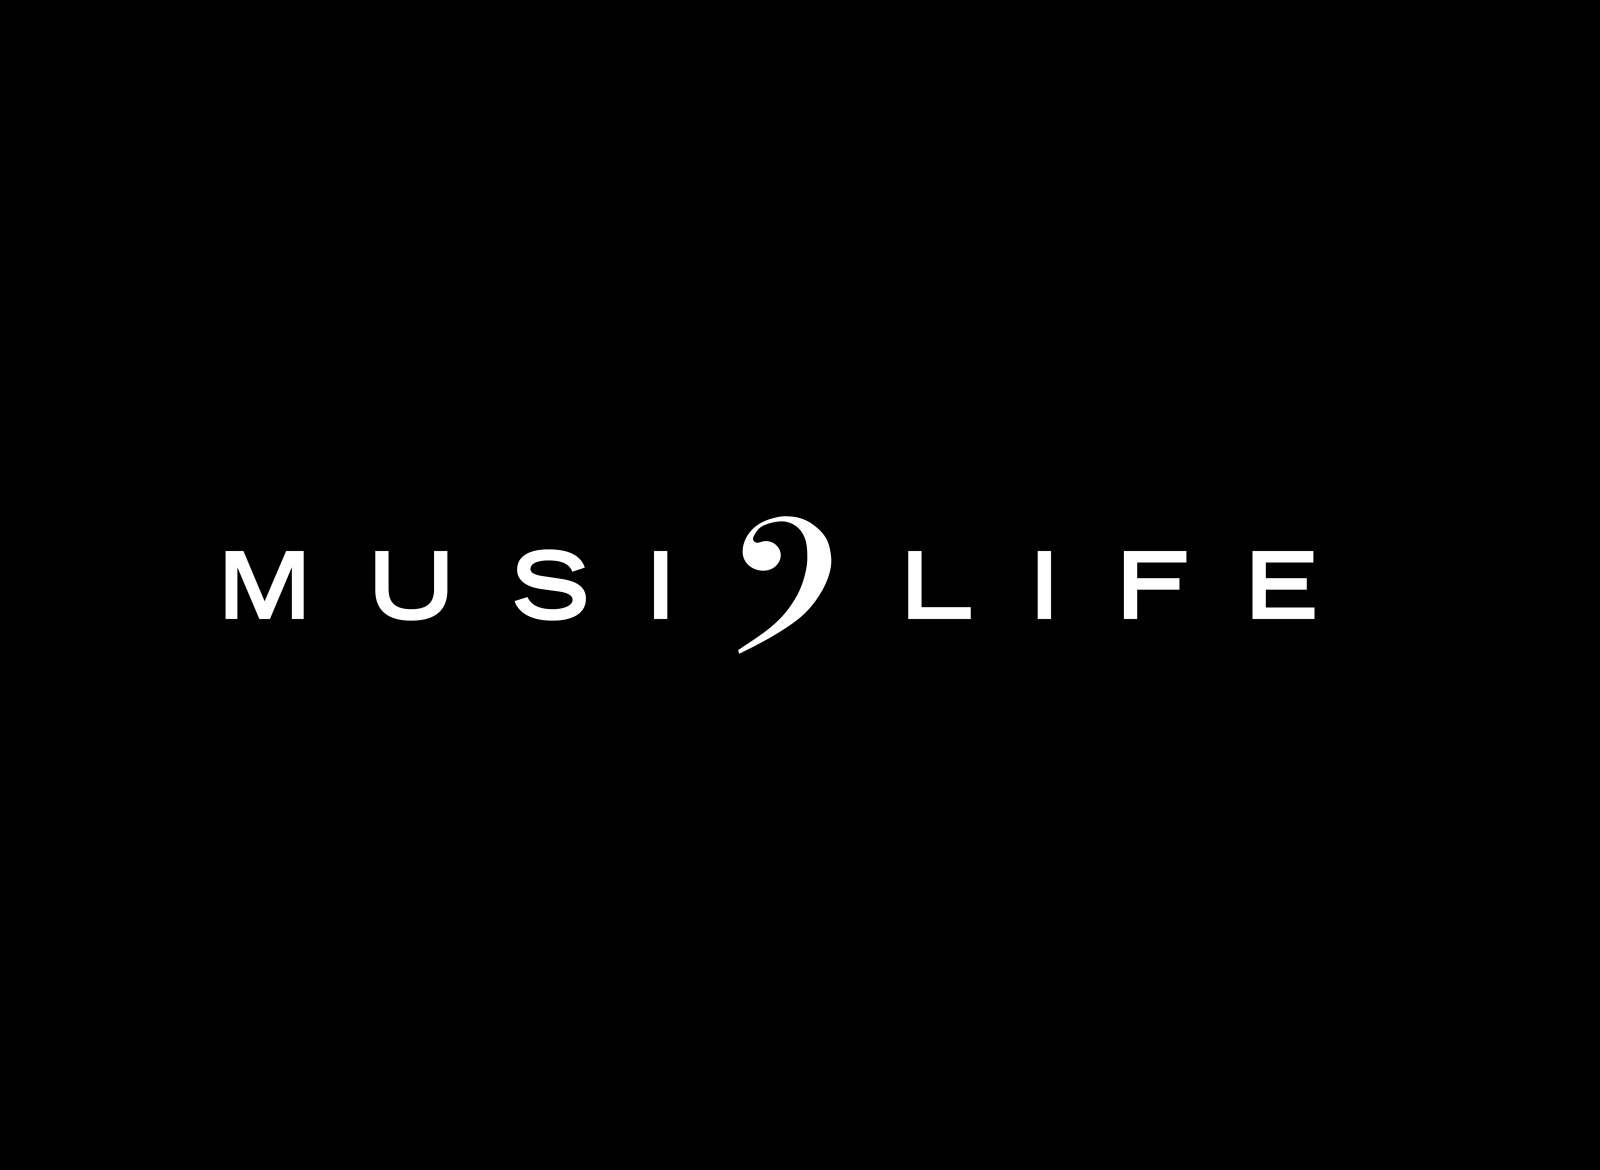 MUSICLIFE by Ryan Rowland on Dribbble